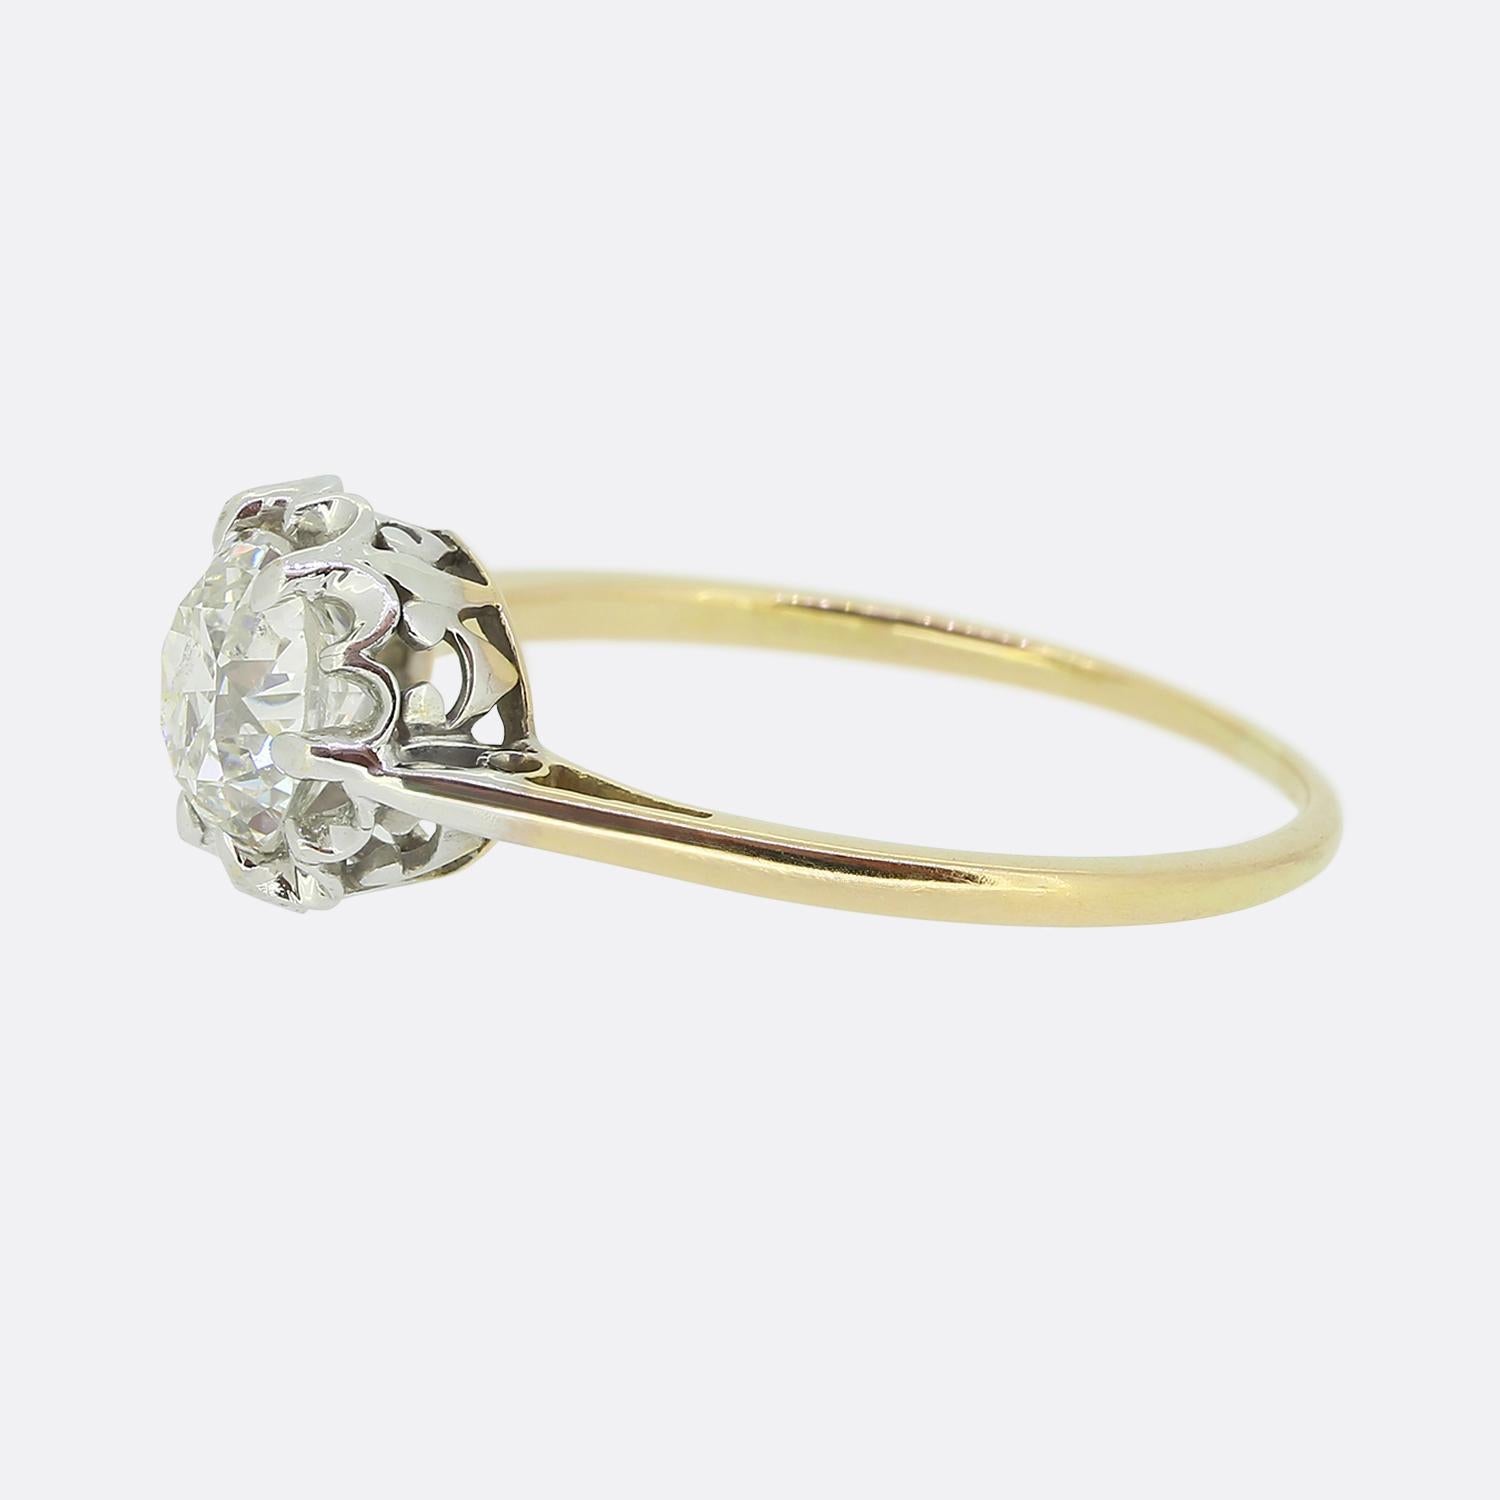 Here we have a gorgeous antique diamond solitaire ring. This piece showcases a scintillating bright white round faceted old European cut diamond which sits alone and proud in an 8 clawed platinum setting atop an ornately pierced under-gallery and